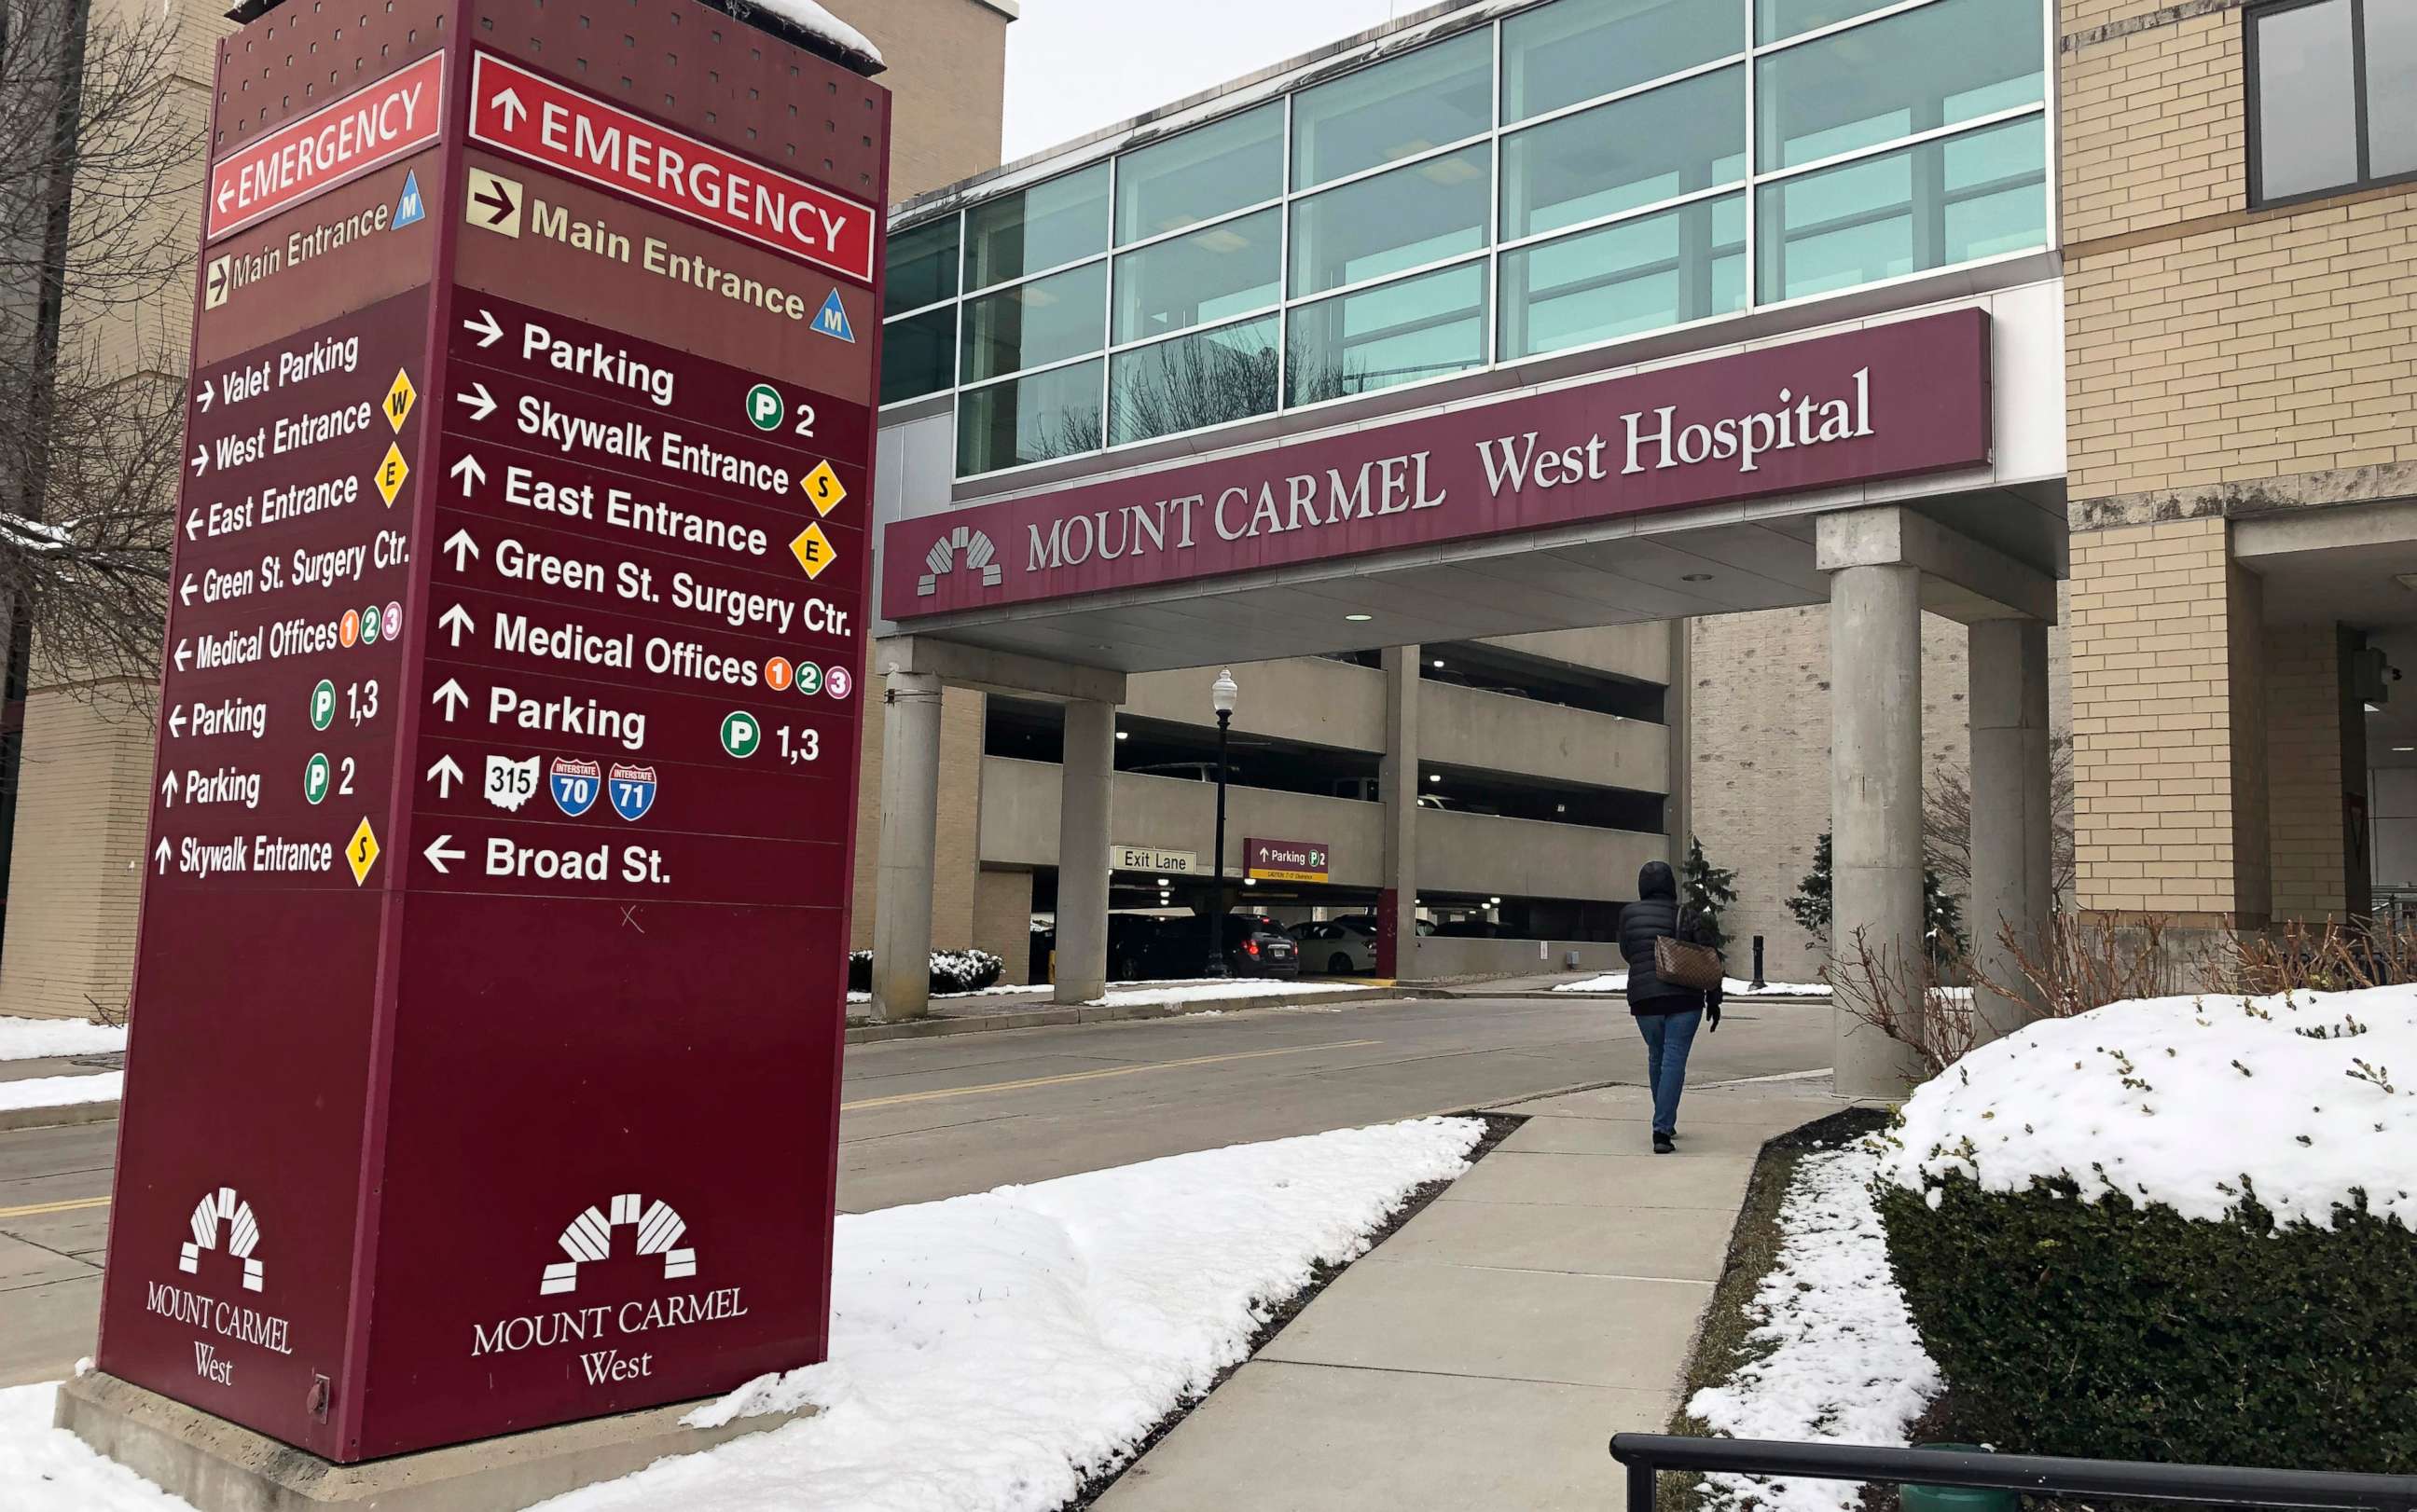 PHOTO: The main entrance to Mount Carmel West Hospital is shown in Columbus, Ohio.